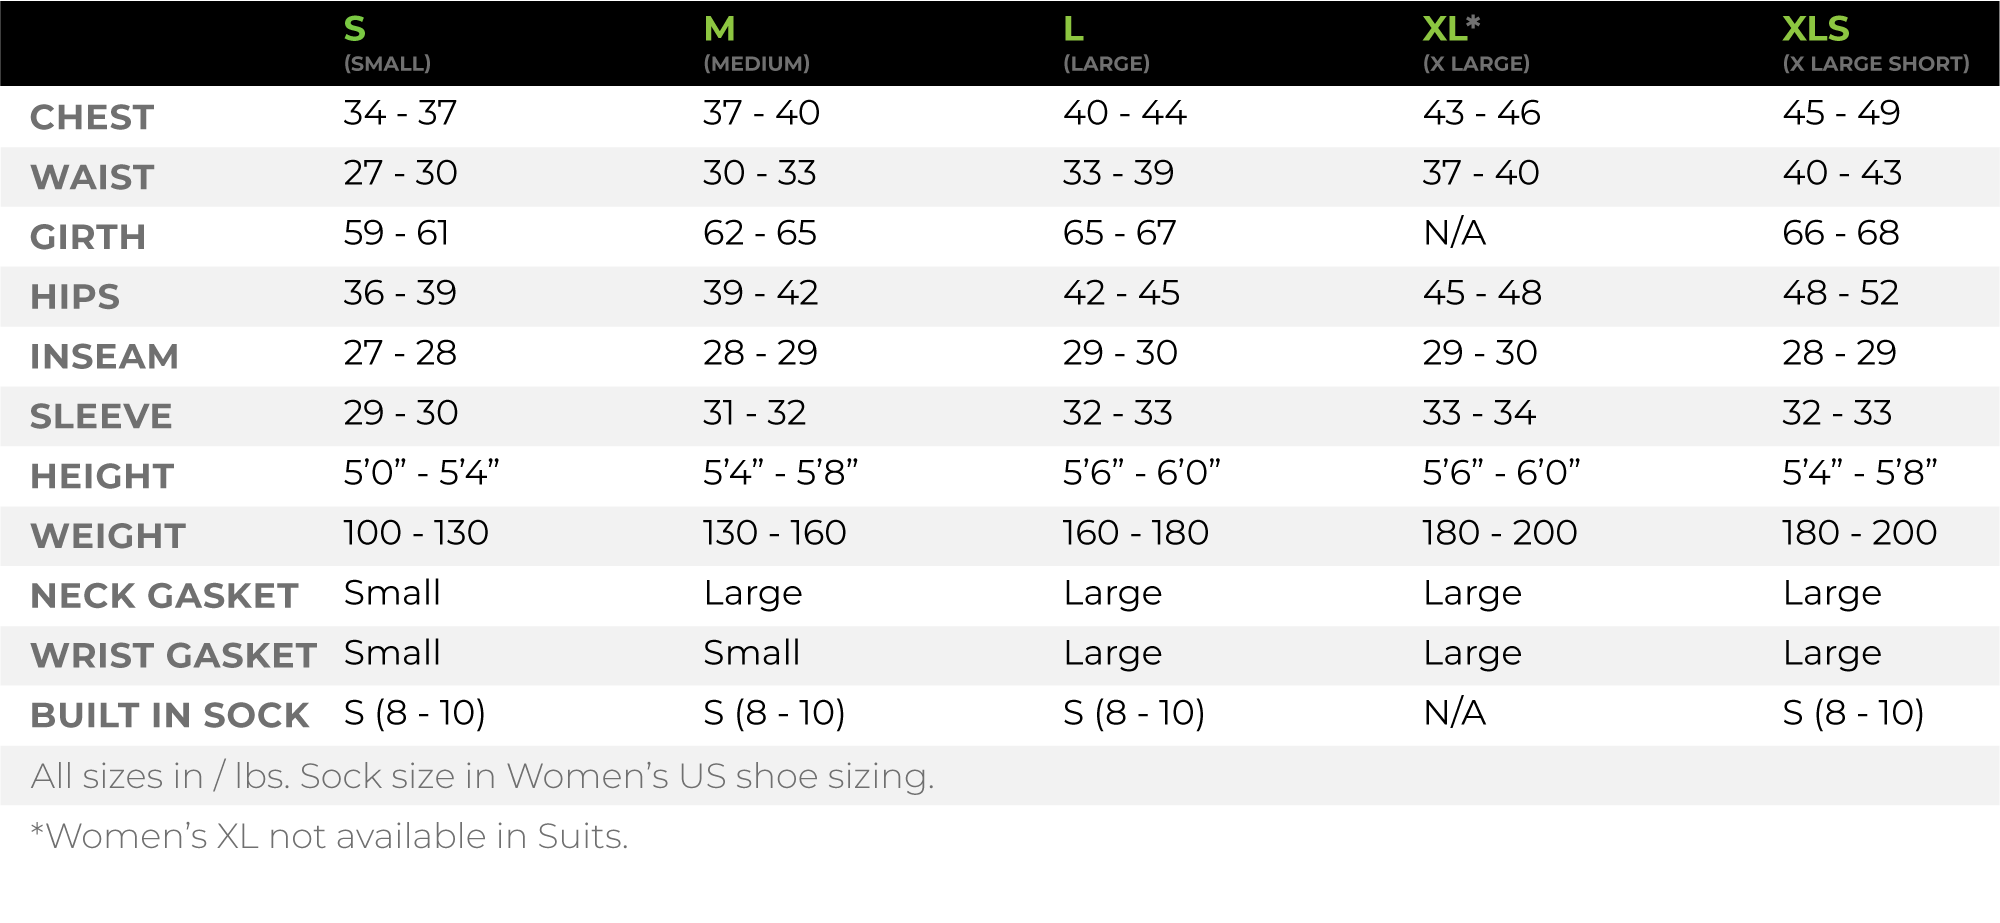 WOMEN'S SIZING CHART in INCHES. S (small)chest	34 - 37waist	27 - 30girth	59 - 61hips	36 - 39inseam	27 - 28sleeve	29 - 30height	5’0” - 5’4”weight	100 - 130neck gasket	Smallwrist gasket	Smallbuilt in sock	S (8 - 10)M (medium)chest	37 - 40waist	30 - 33girth	62 - 65hips	39 - 42inseam	28 - 29sleeve	31 - 32height	5’4” - 5’8”weight	130 - 160neck gasket	Largewrist gasket	Smallbuilt in sock	S (8 - 10)L (large)chest	40 - 44waist	33 - 39girth	65 - 67hips	42 - 45inseam	29 - 30sleeve	32 - 33height	5’6” - 6’0”weight	160 - 180neck gasket	Largewrist gasket	Largebuilt in sock	S (8 - 10)XL (x large)chest	43 - 46waist	37 - 40girth	N/Ahips	45 - 48inseam	29 - 30sleeve	33 - 34height	5’6” - 6’0”weight	180 - 200neck gasket	Largewrist gasket	Largebuilt in sock	N/AXLS (x large short)chest	45 - 49waist	40 - 43girth	66 - 68hips	48 - 52inseam	28 - 29sleeve	32 - 33height	5’4” - 5’8”weight	180 - 200neck gasket	Largewrist gasket	Largebuilt in sock	S (8 - 10)All sizes inches / pounds. Sock size in Women’s U.S. shoe sizing. *Women’s X.L. not available in Suits.